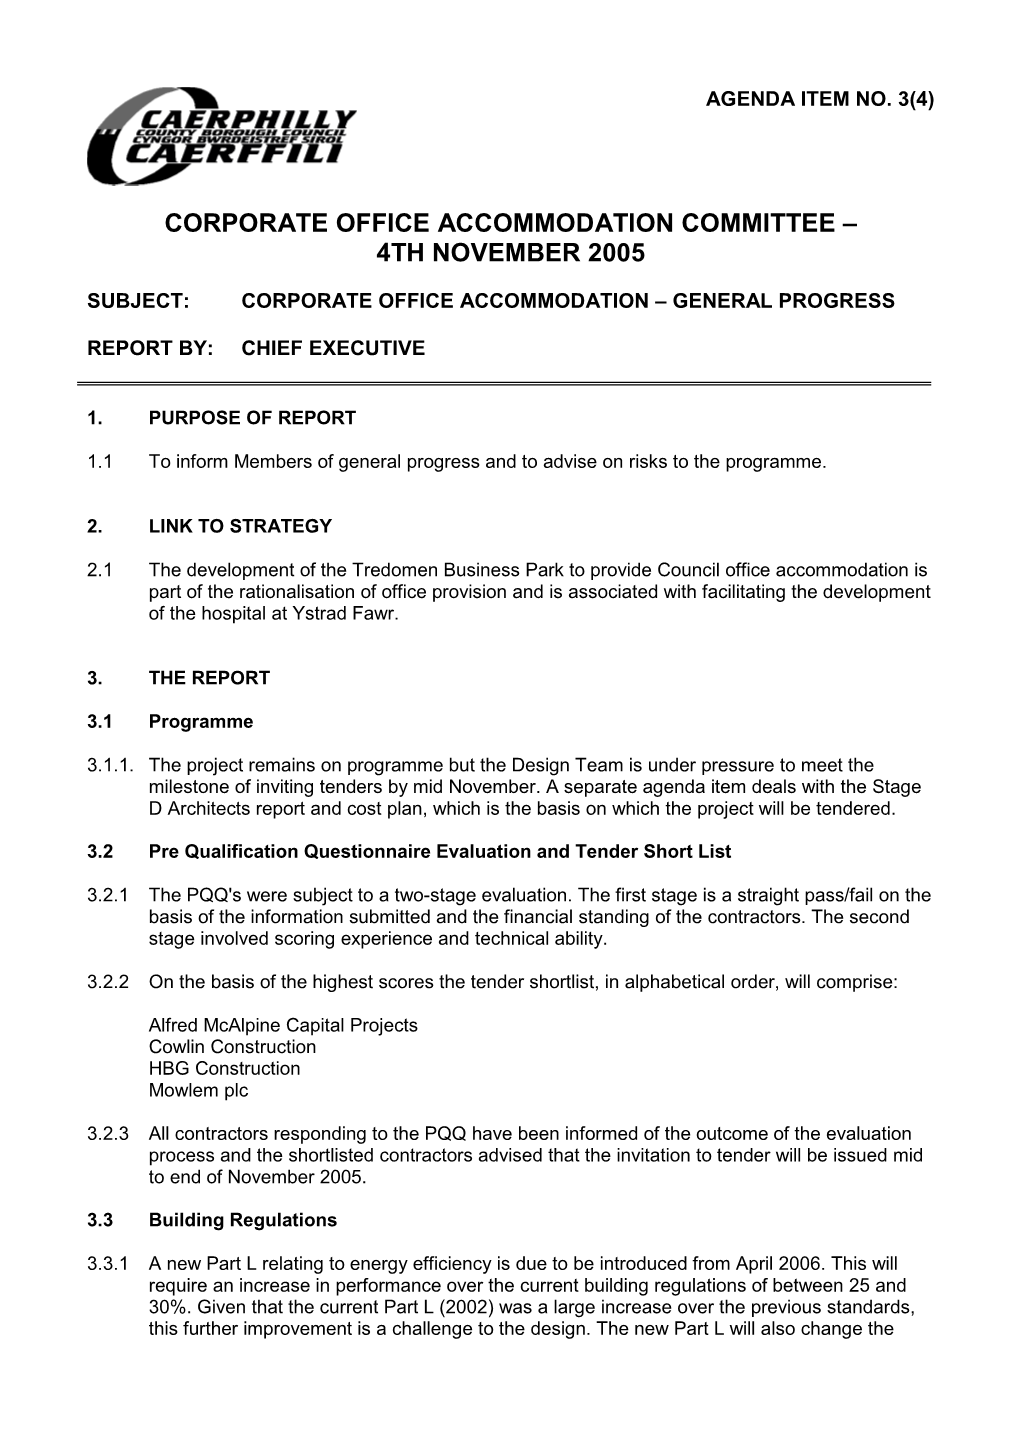 Corporate Office Accommodation Committee – 4Th November 2005